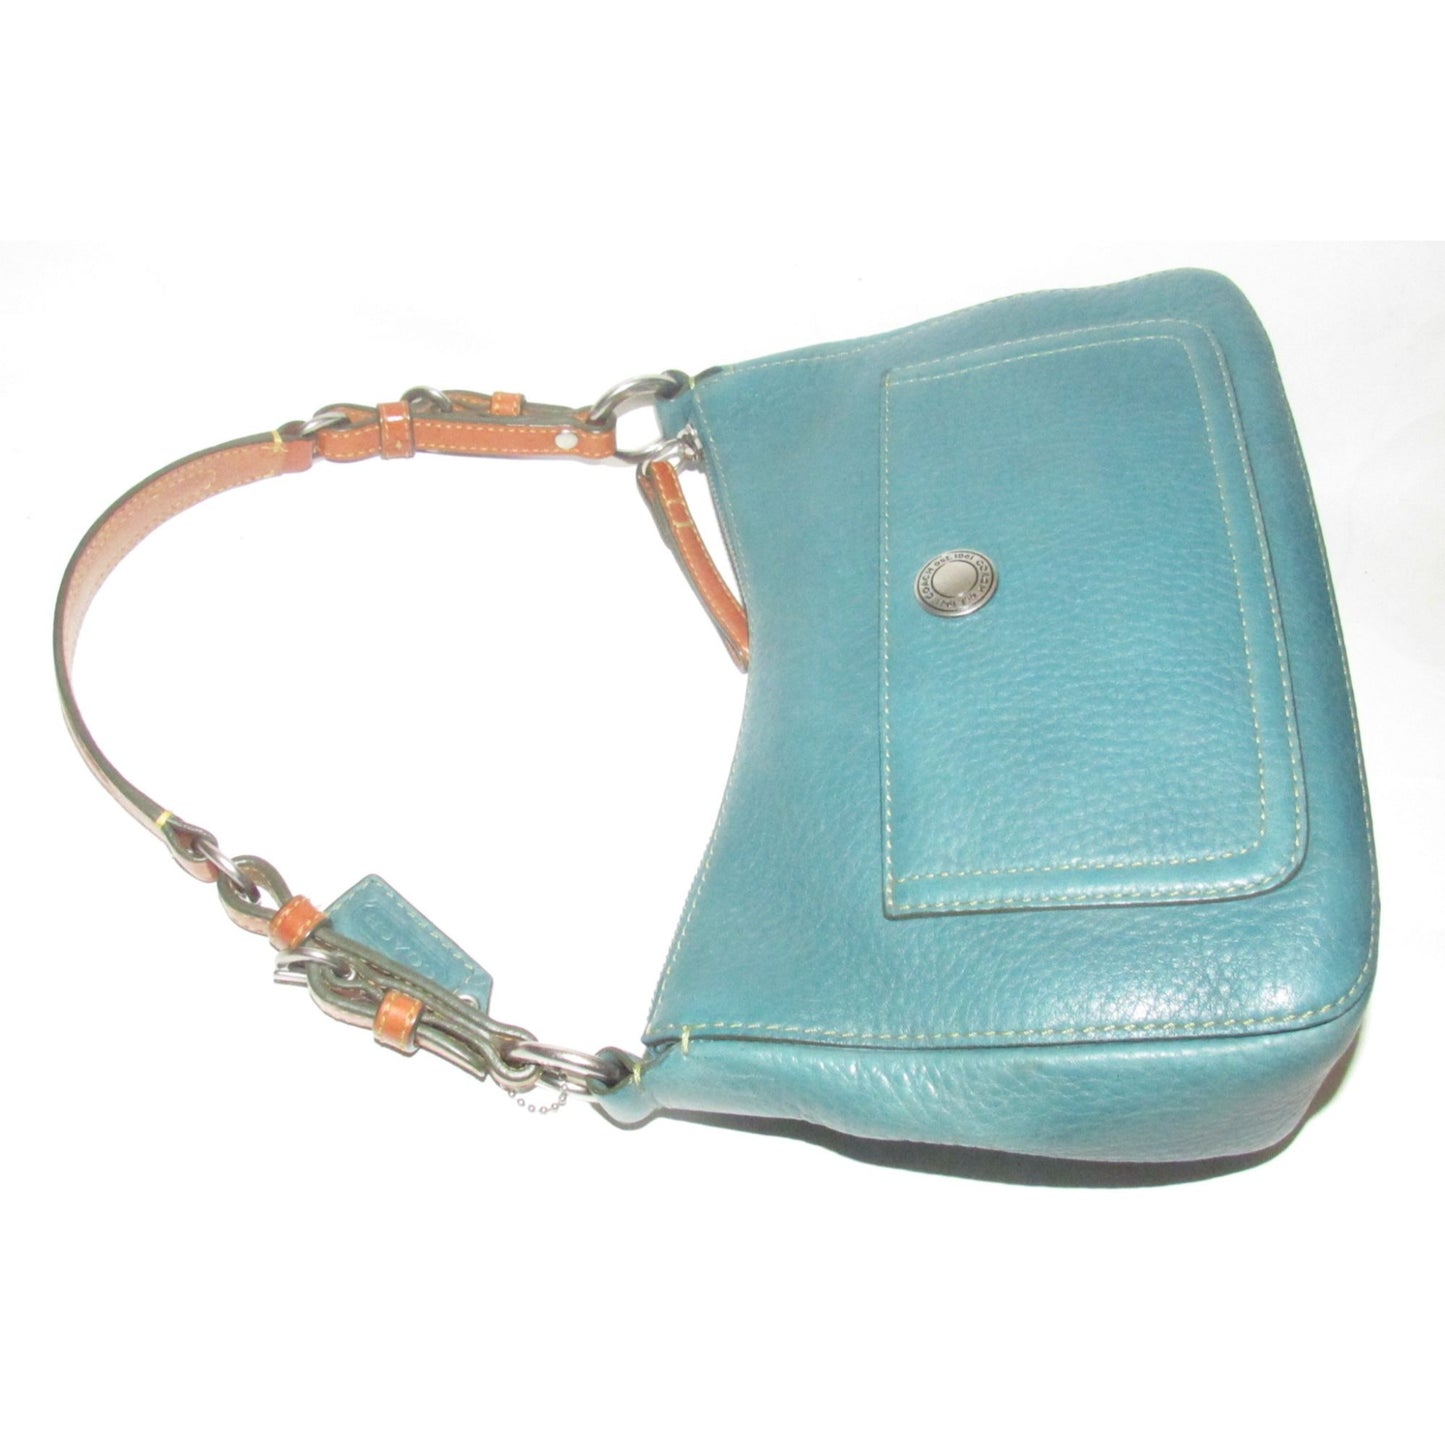 Coach, 'Chelsea' hobo, in a teal soft leather, hobo style purse with a brown, strap with unique chrome buckles